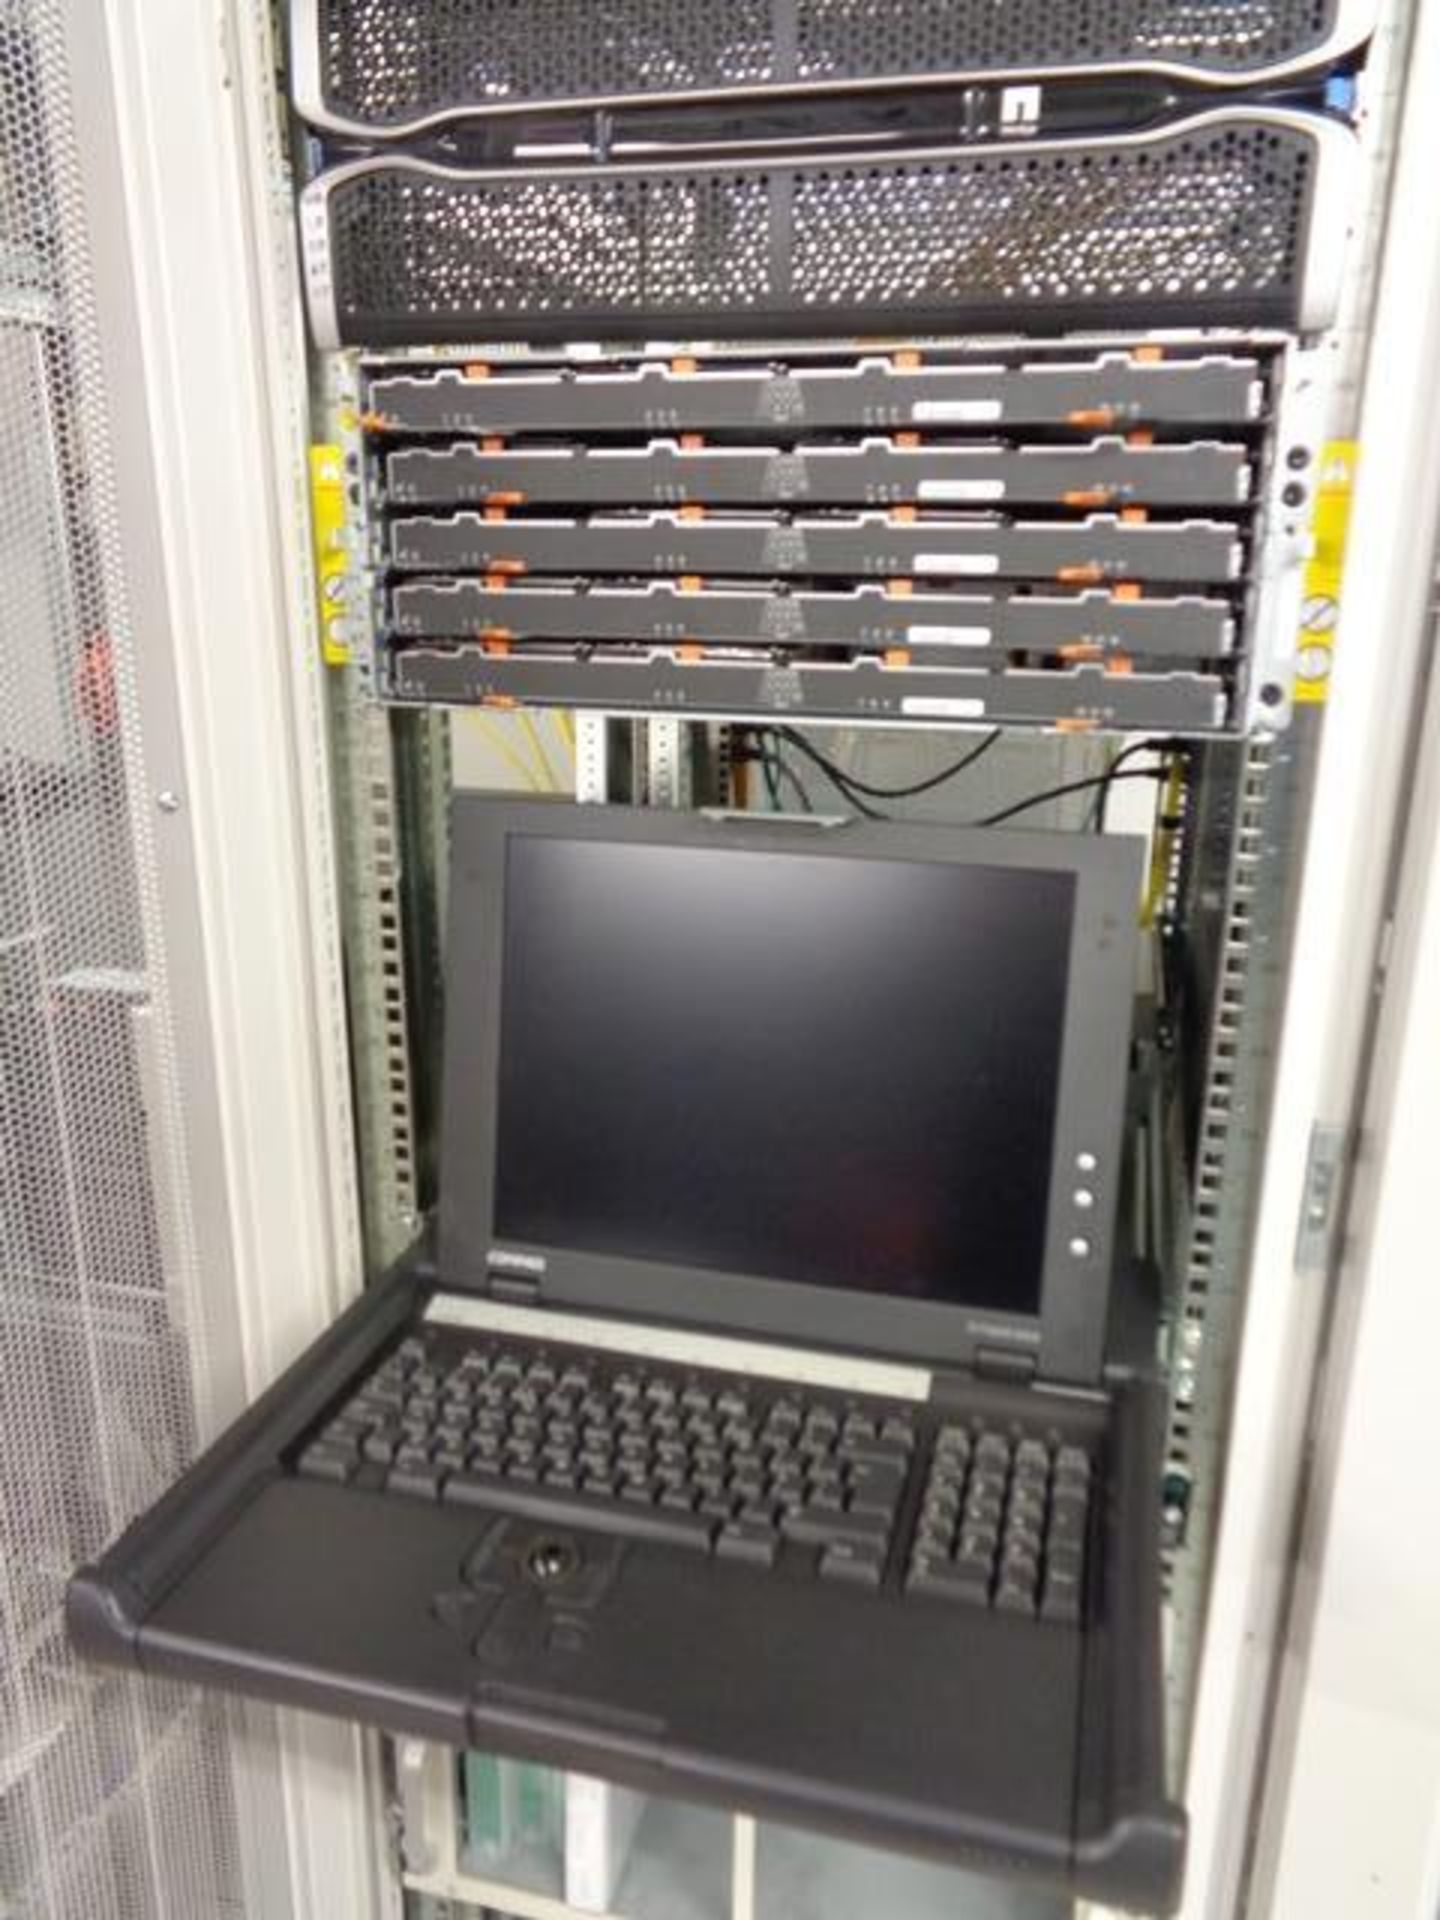 Compaq server cabinet (ref. 5/19) and contents, to include HP Proliant DL380 Gen 9, Net App rack - Image 3 of 3